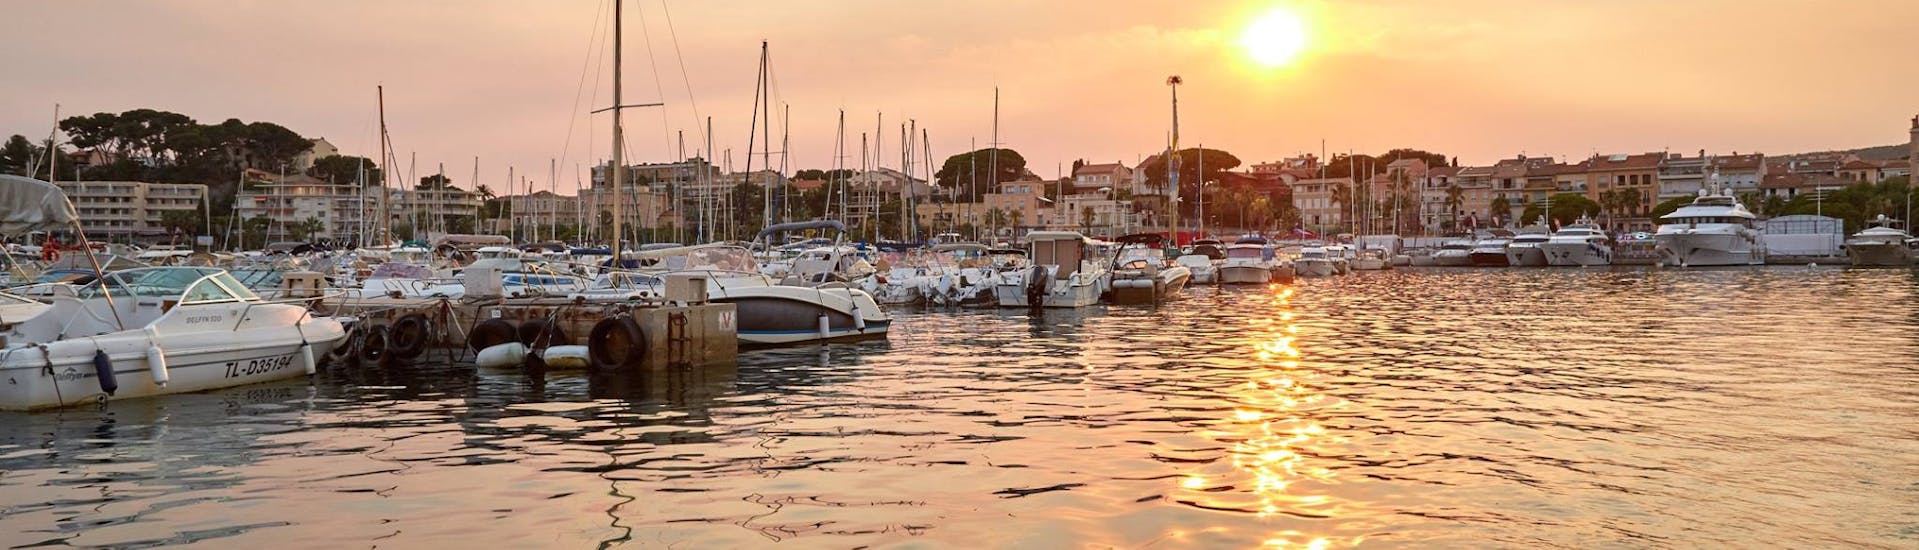 Sunset at the harbour during the RIB Boat Trip in the Calanques National Park at Sunset by Atlantide Promenades en mer Bandol.